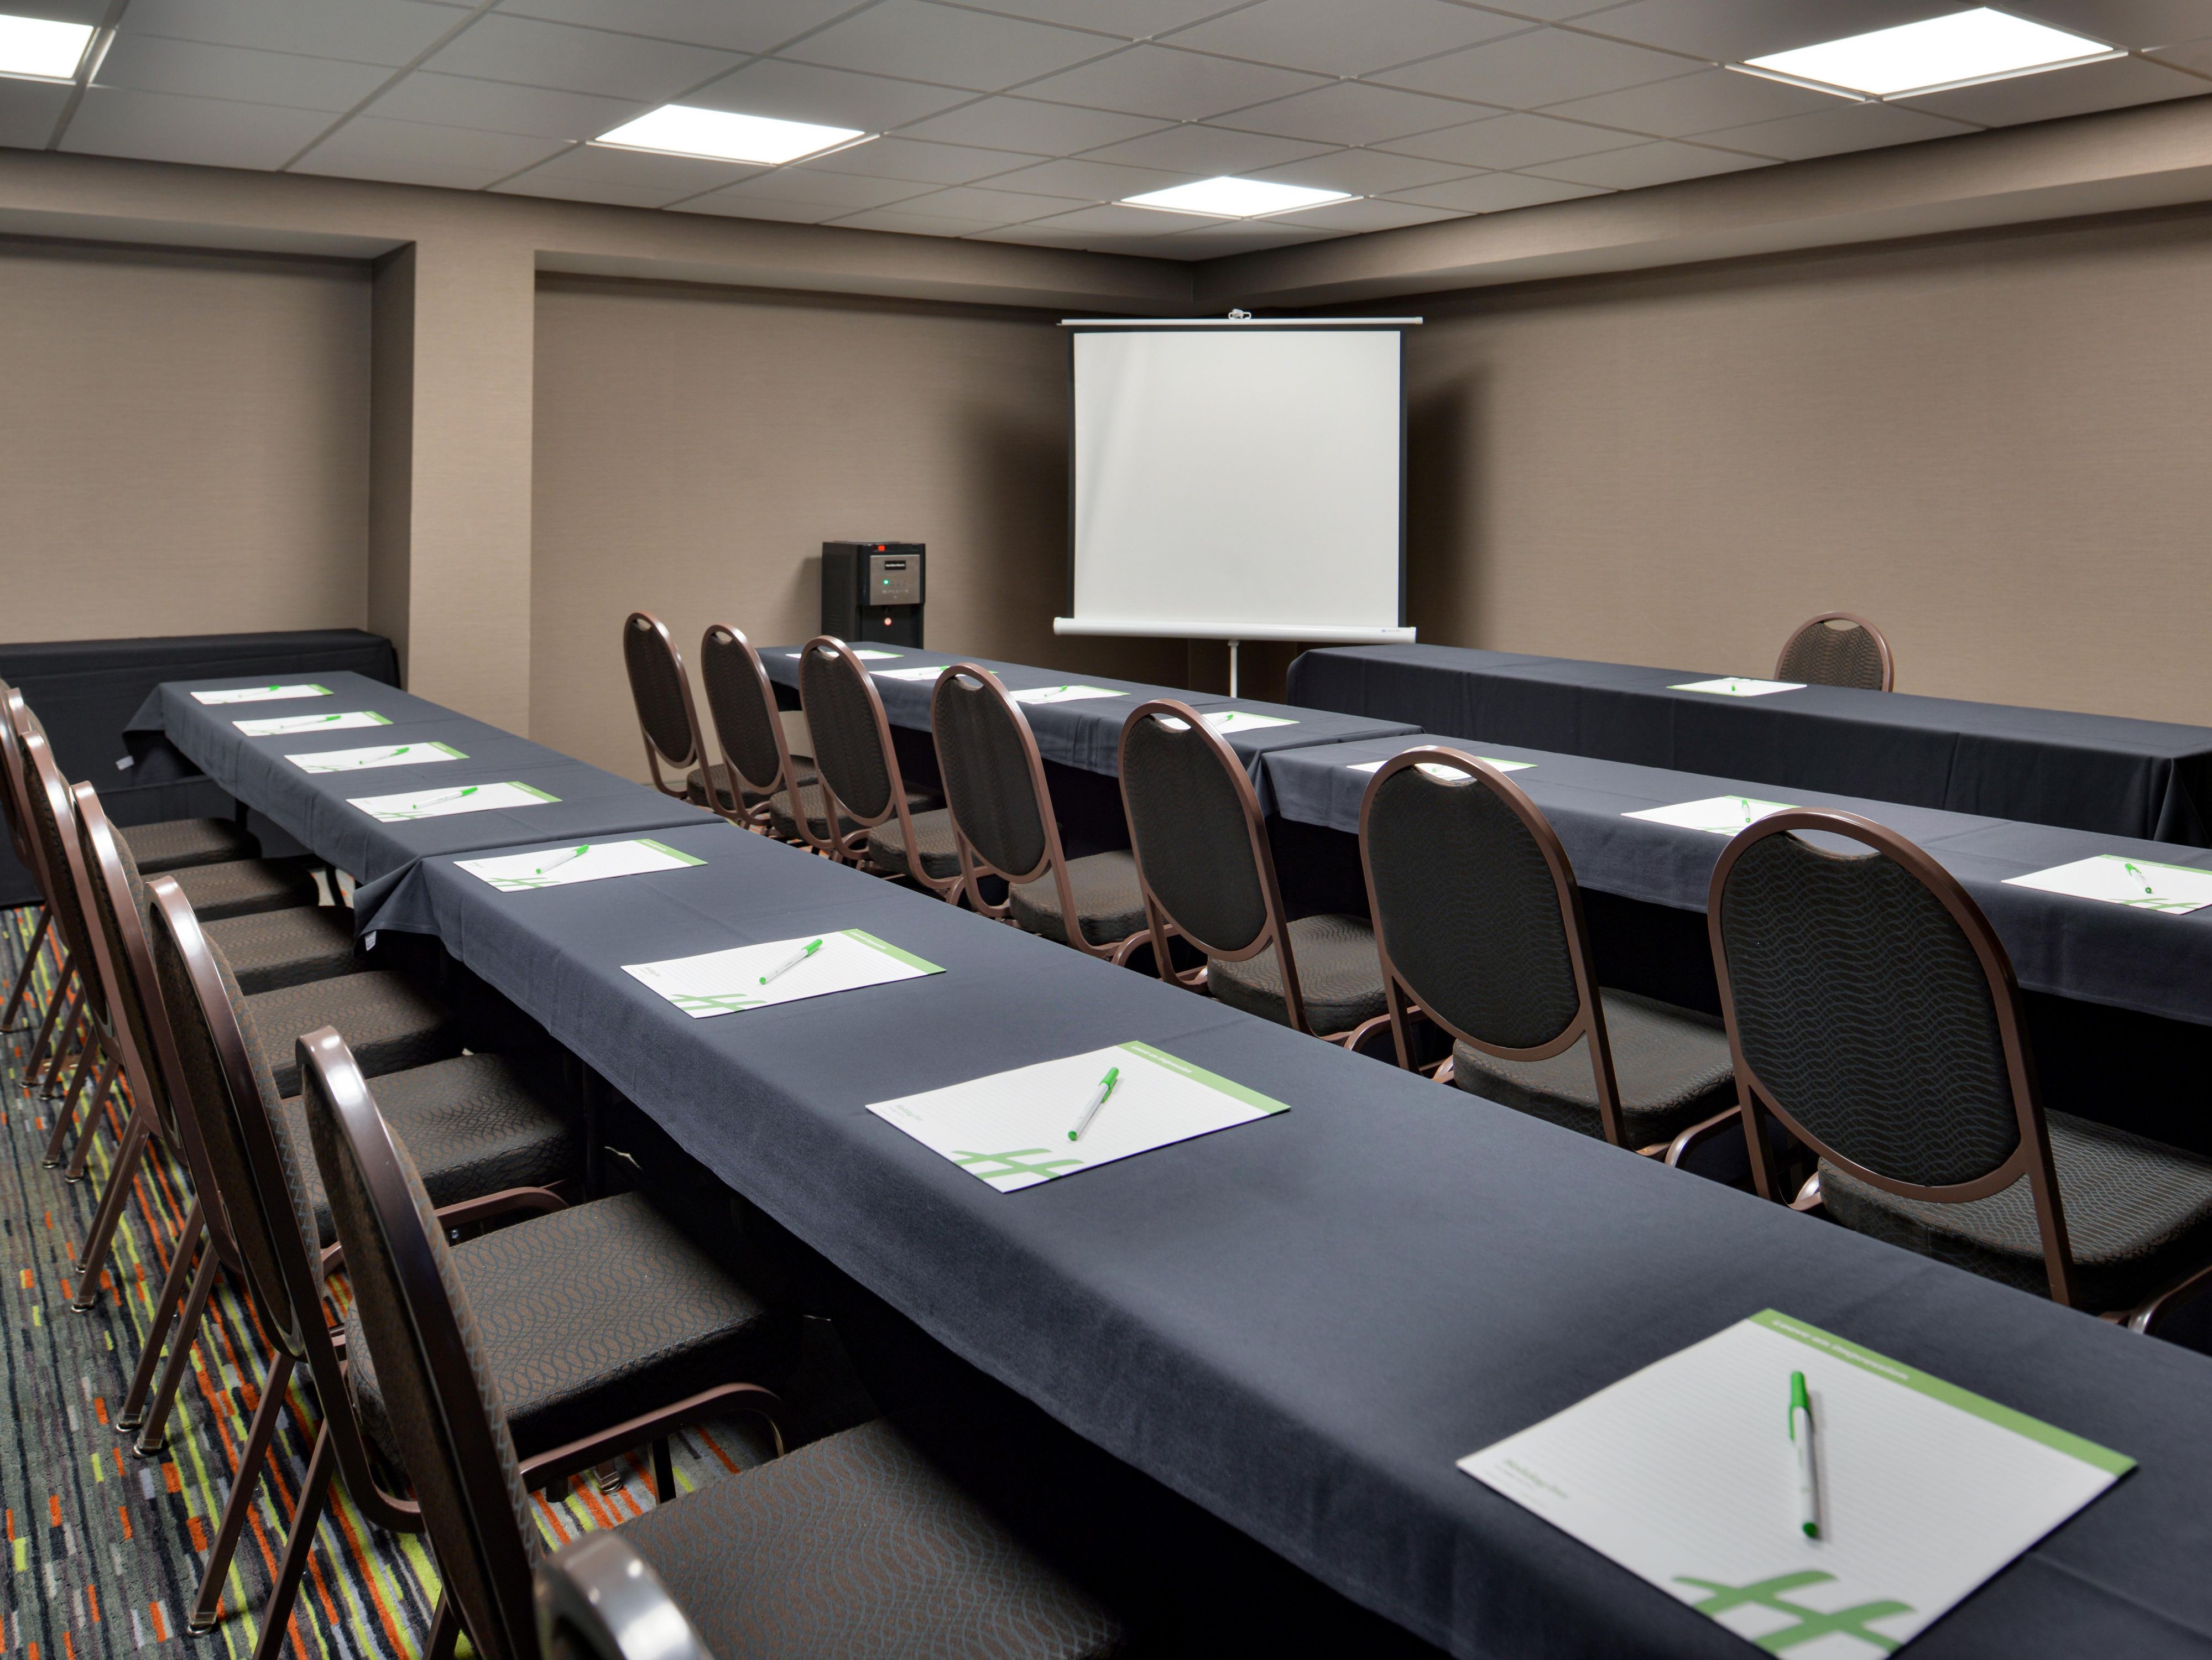 We have four meeting spaces to accommodate your various needs. Our largest room is 1800 square feet. Call our sales department today to see how we can make your next meeting, corporate event, party or banquet a success.